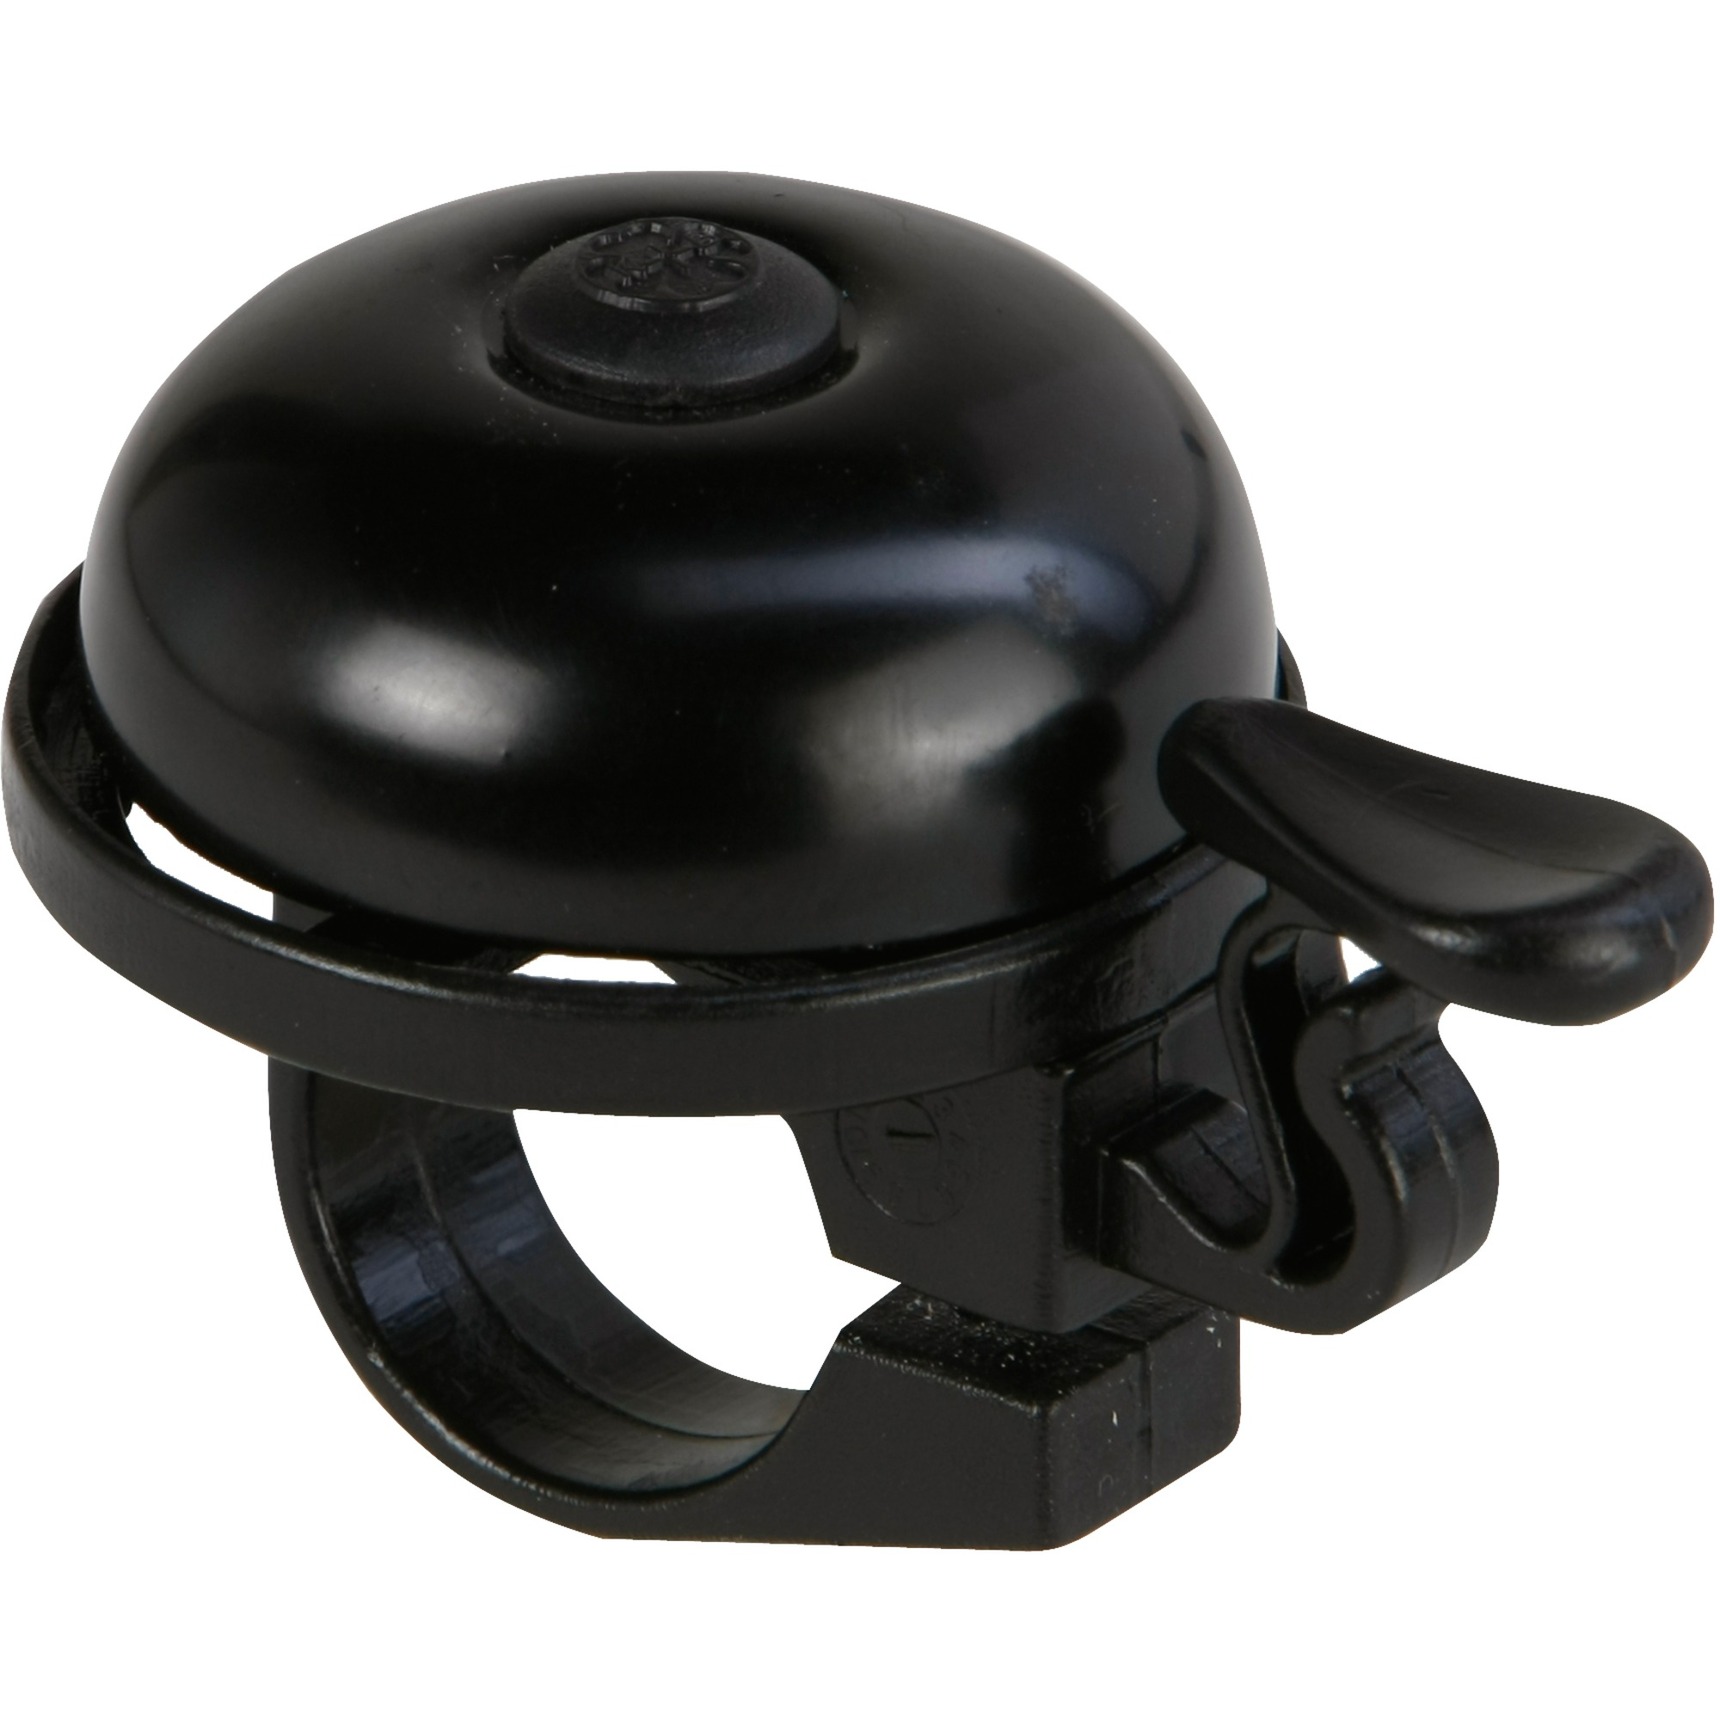 85801, Bicycle Bell